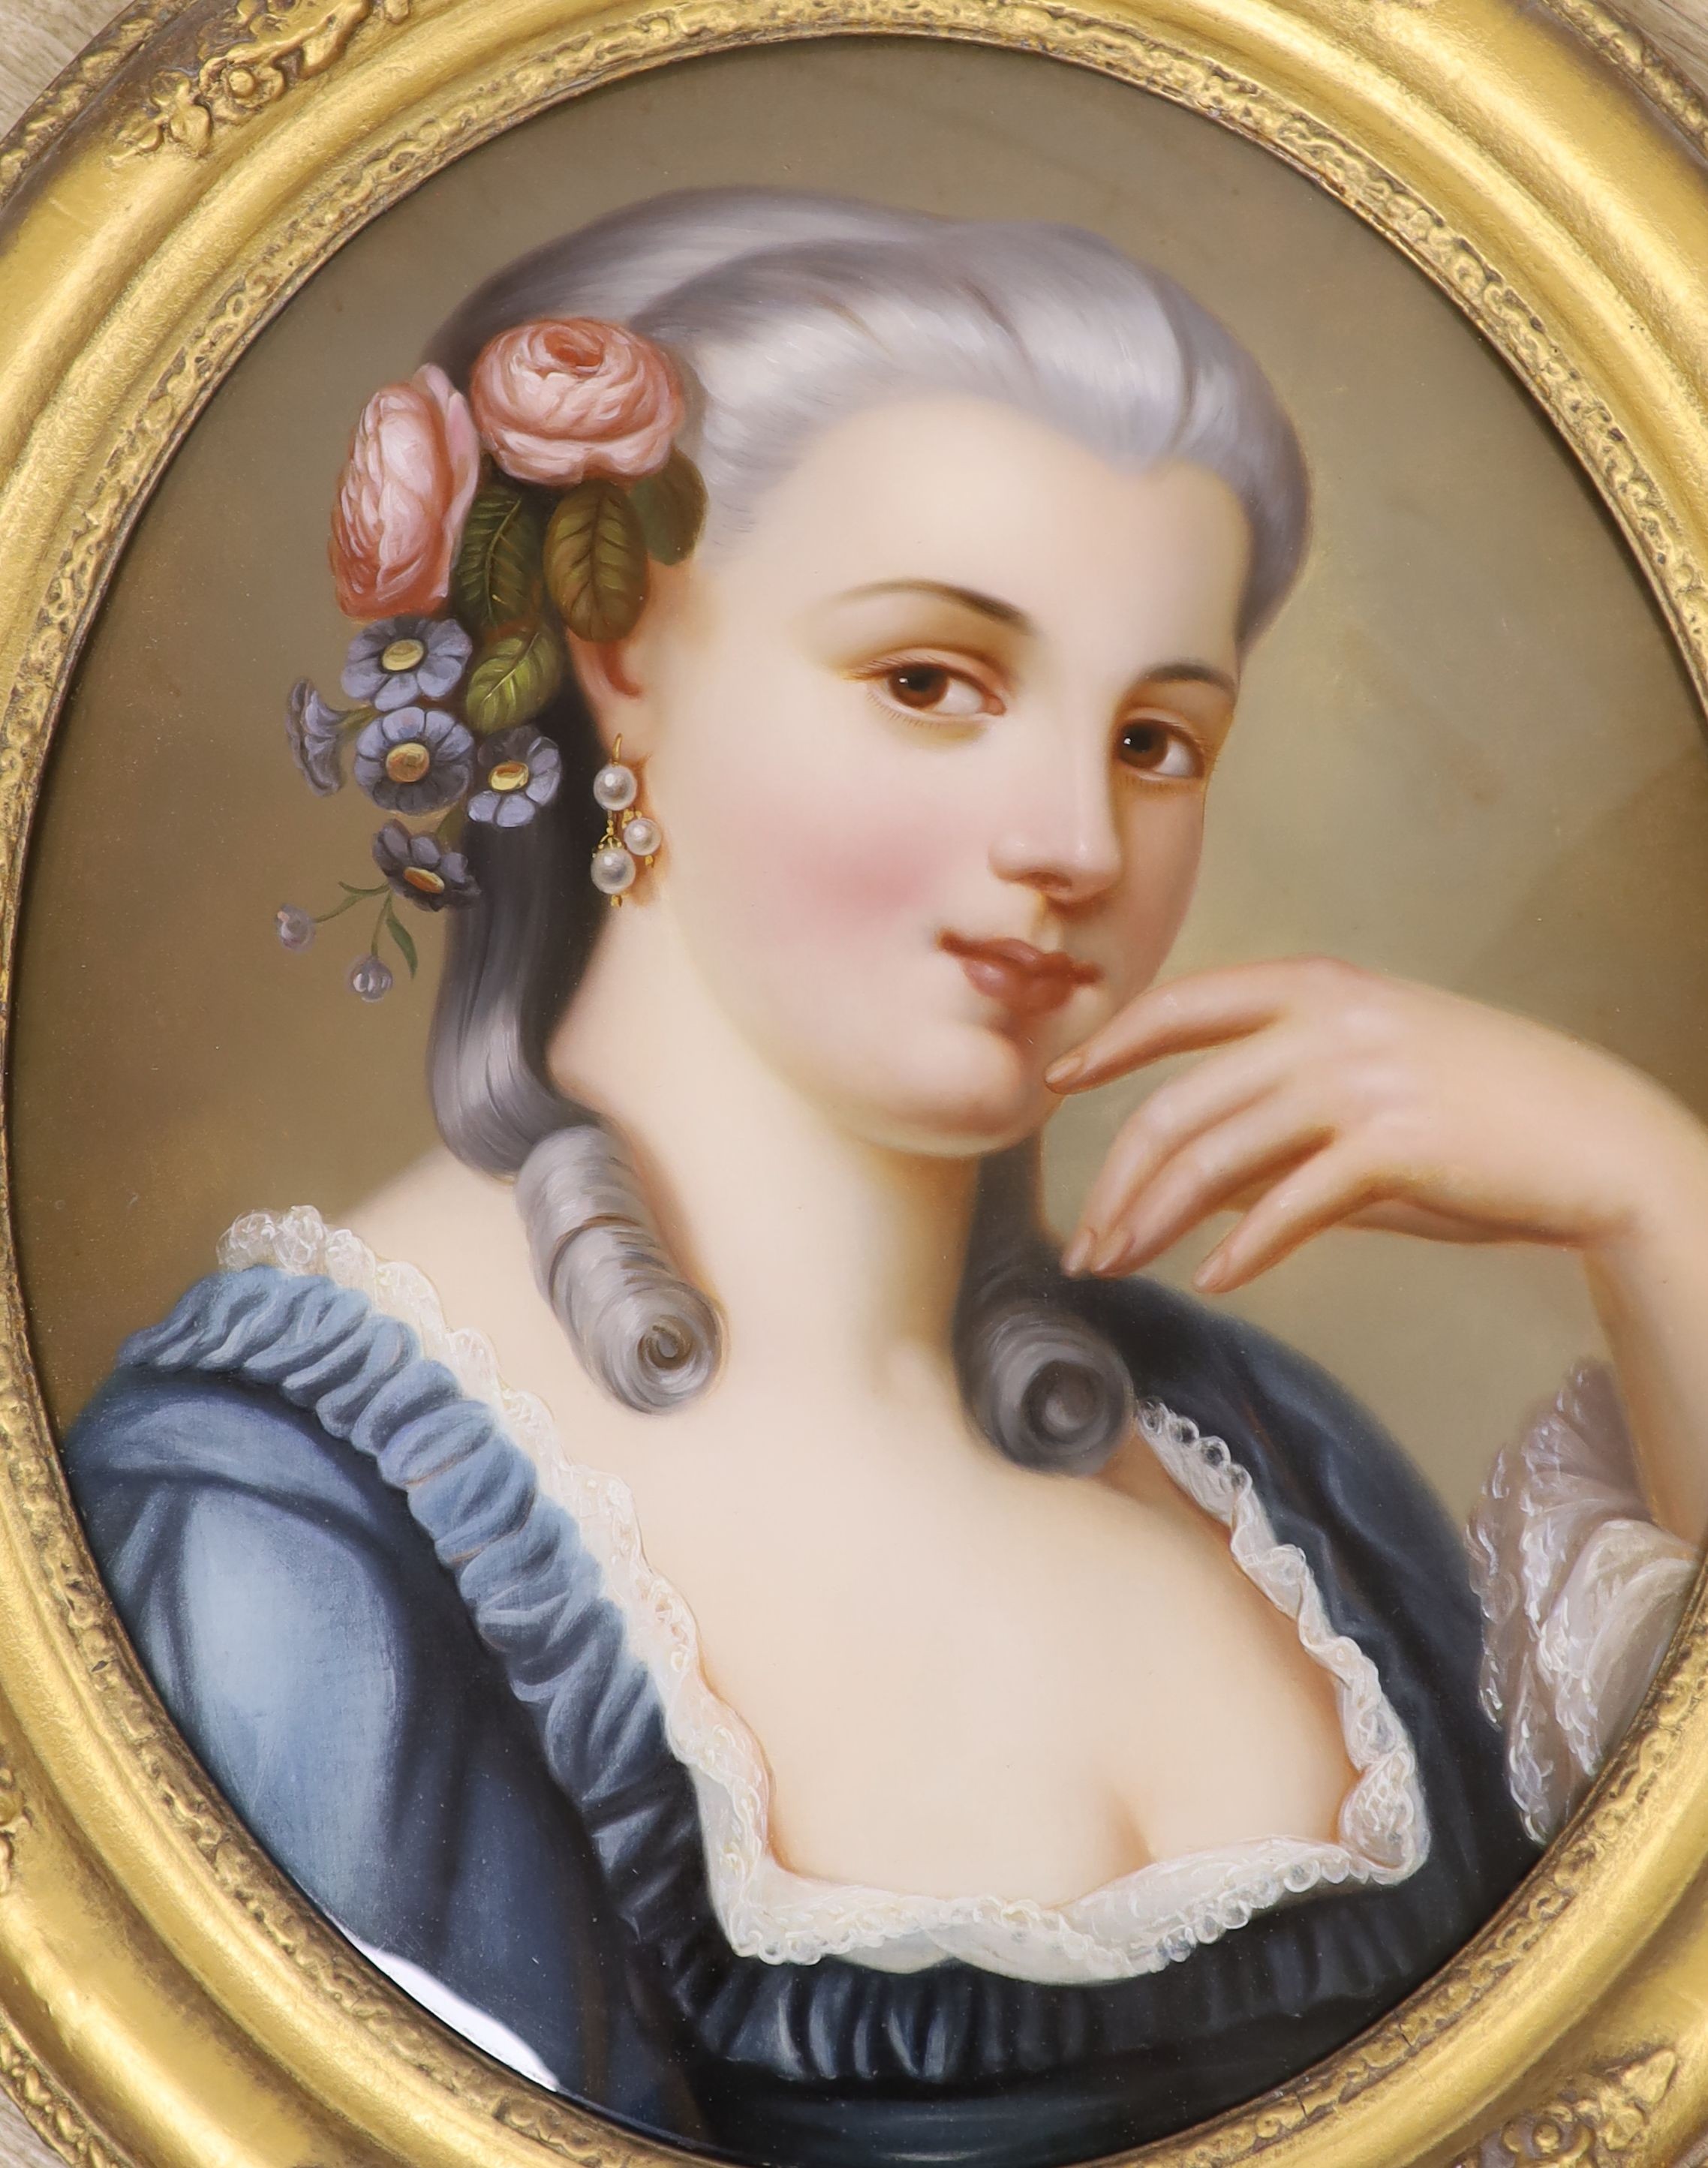 19th century French School, reverse painting on glass, Portrait of a lady, oval, 45 x 36cm